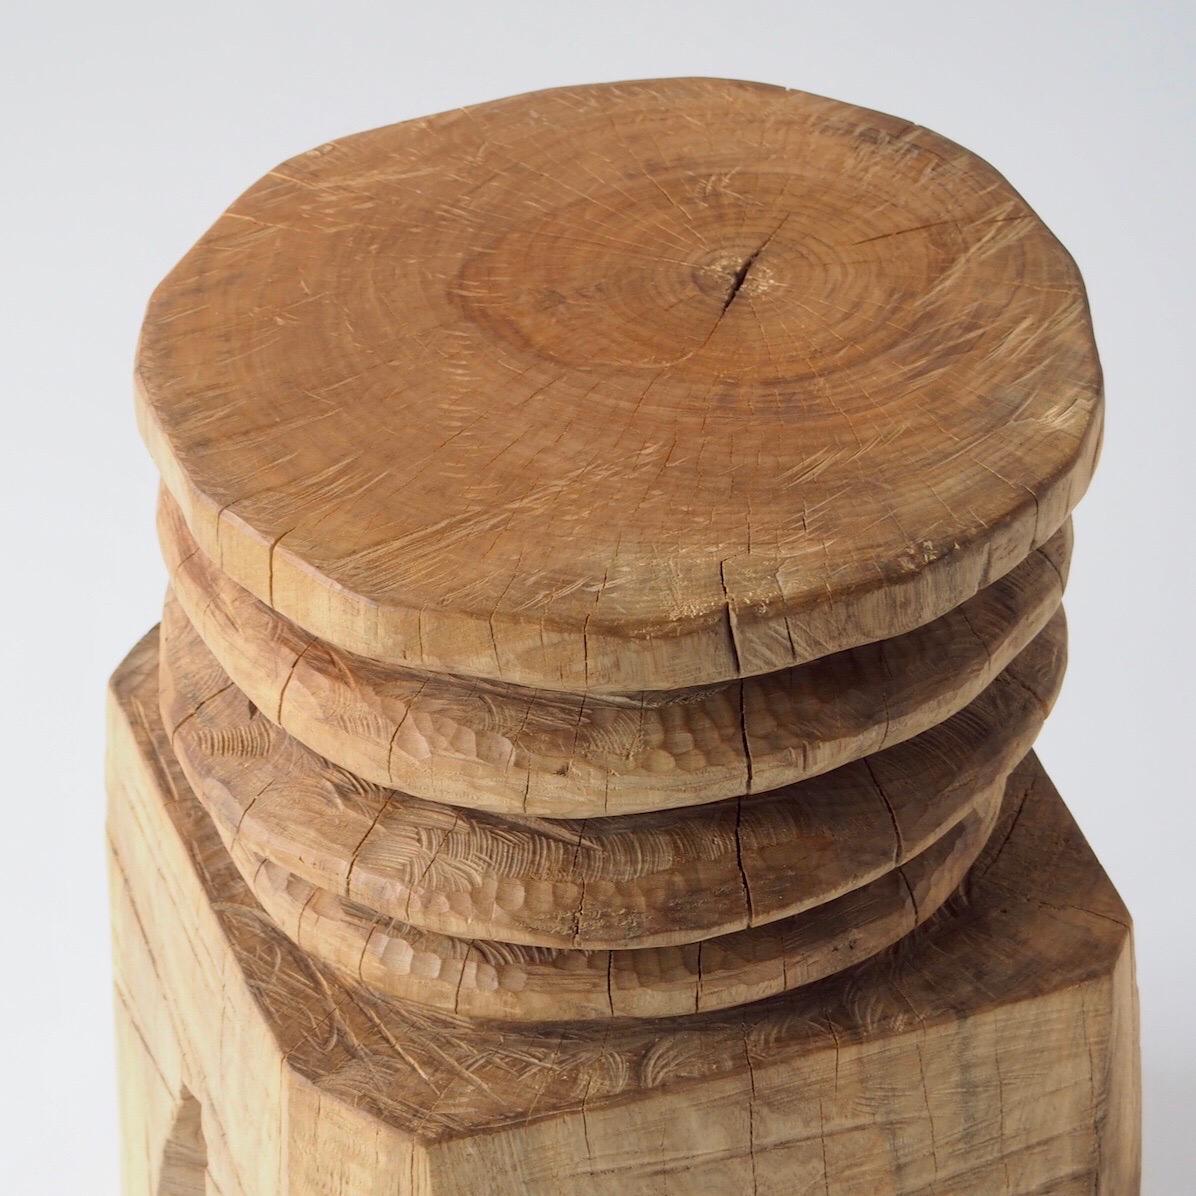 Contemporary Hiroyuki Nishimura Zougei Sculptural Side Table Stool 26 Tribal Glamping For Sale